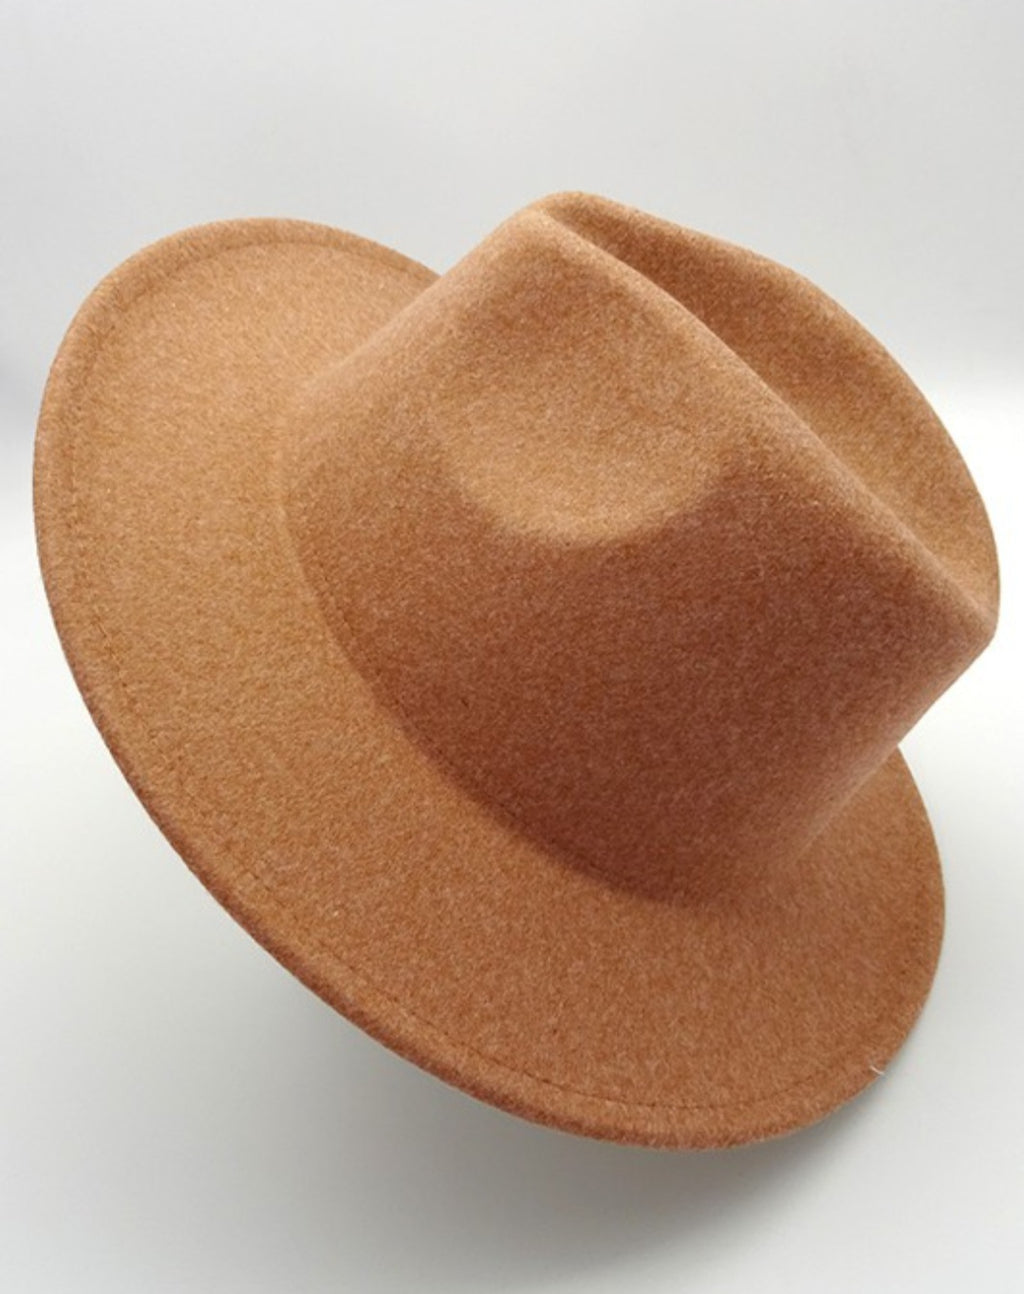 Camel brown wool blend unisex fedora hat, located in Owego, NY